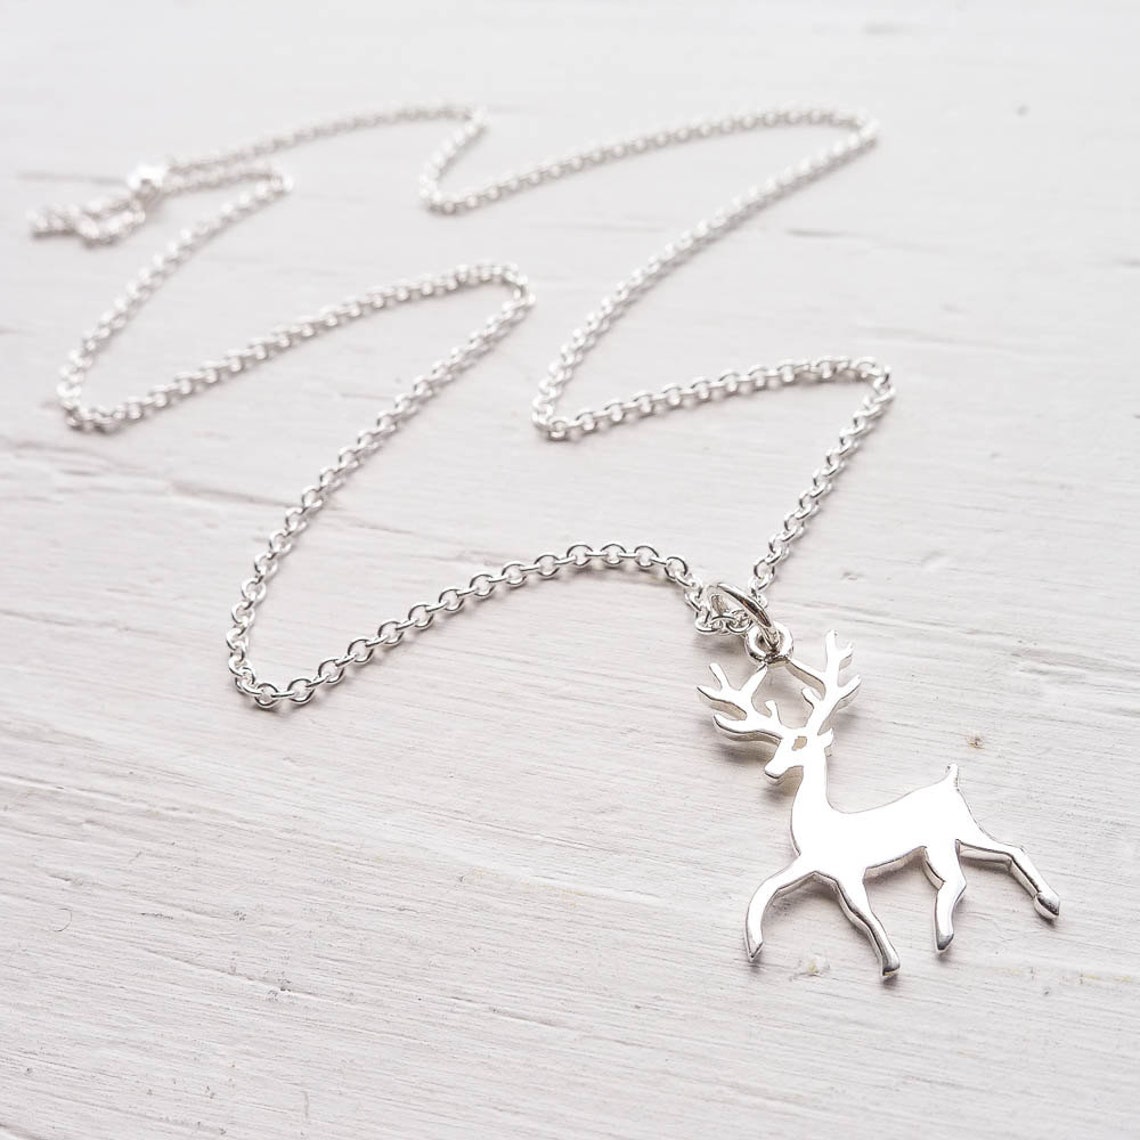 Deer Necklace Sterling Silver Buck Pendant With Antlers - Etsy